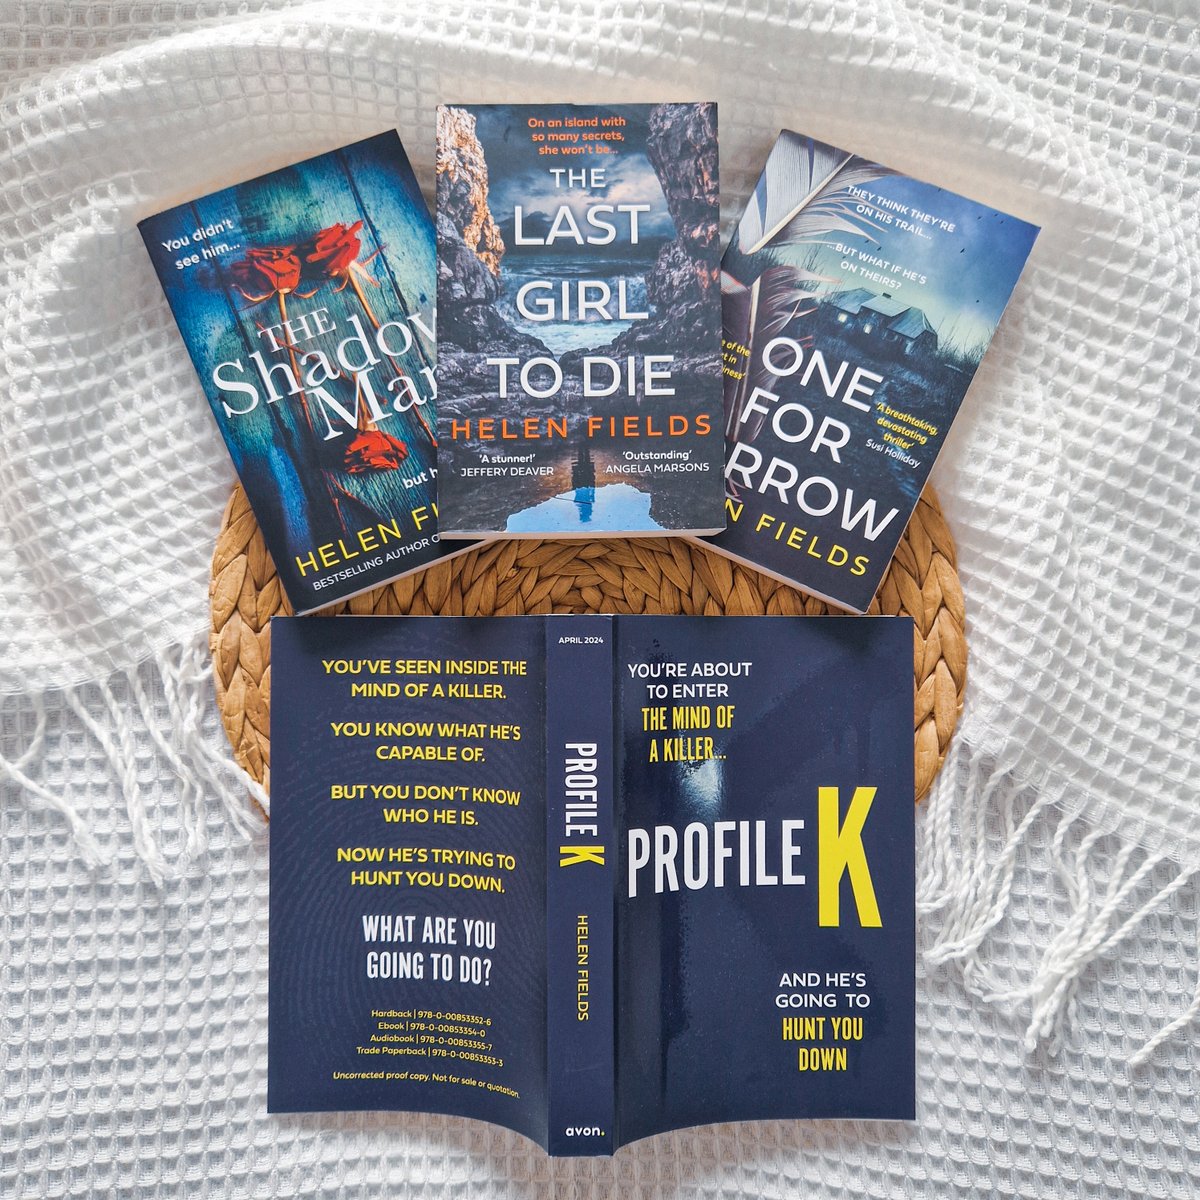 Today is my stop on the blog tour for #ProfileK by @Helen_Fields with @AvonBooksUK - Exactly what I love about a Helen Fields book - an original angle, interesting serial killer, mysterious illness & great conversations around profiling. Full review: readwatchdrinkcoffee.wordpress.com/2024/05/05/blo…